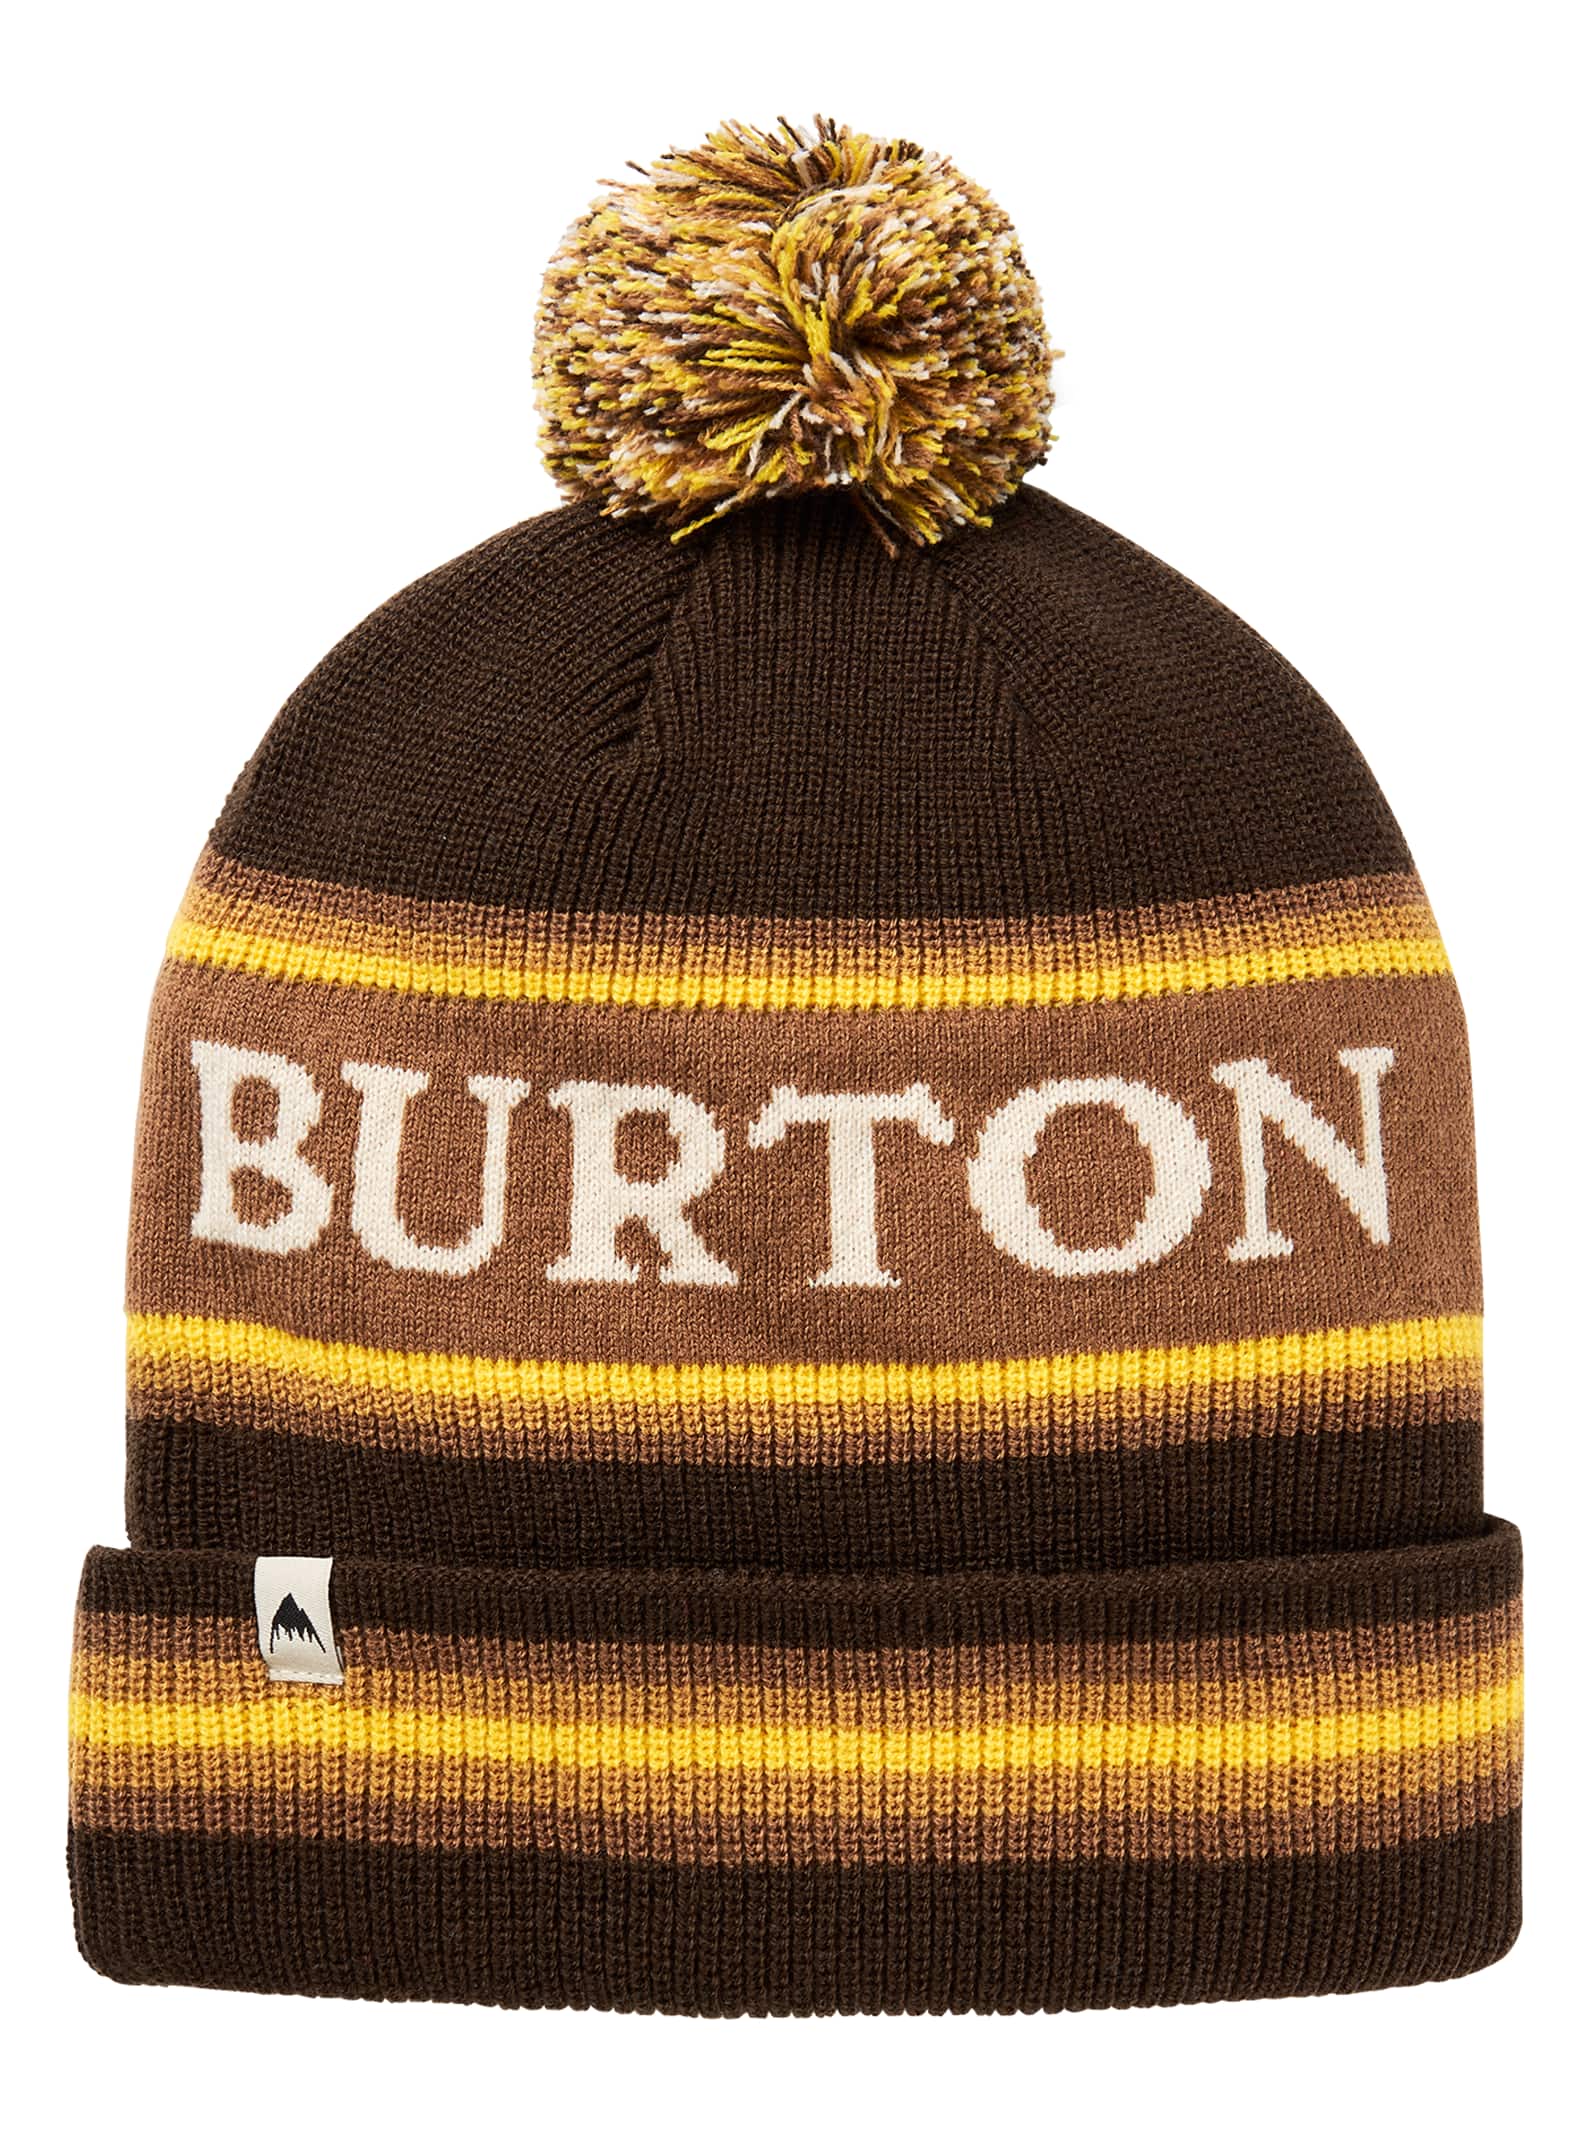 Tap for awesome hats, balaclavas, beanies and more at the